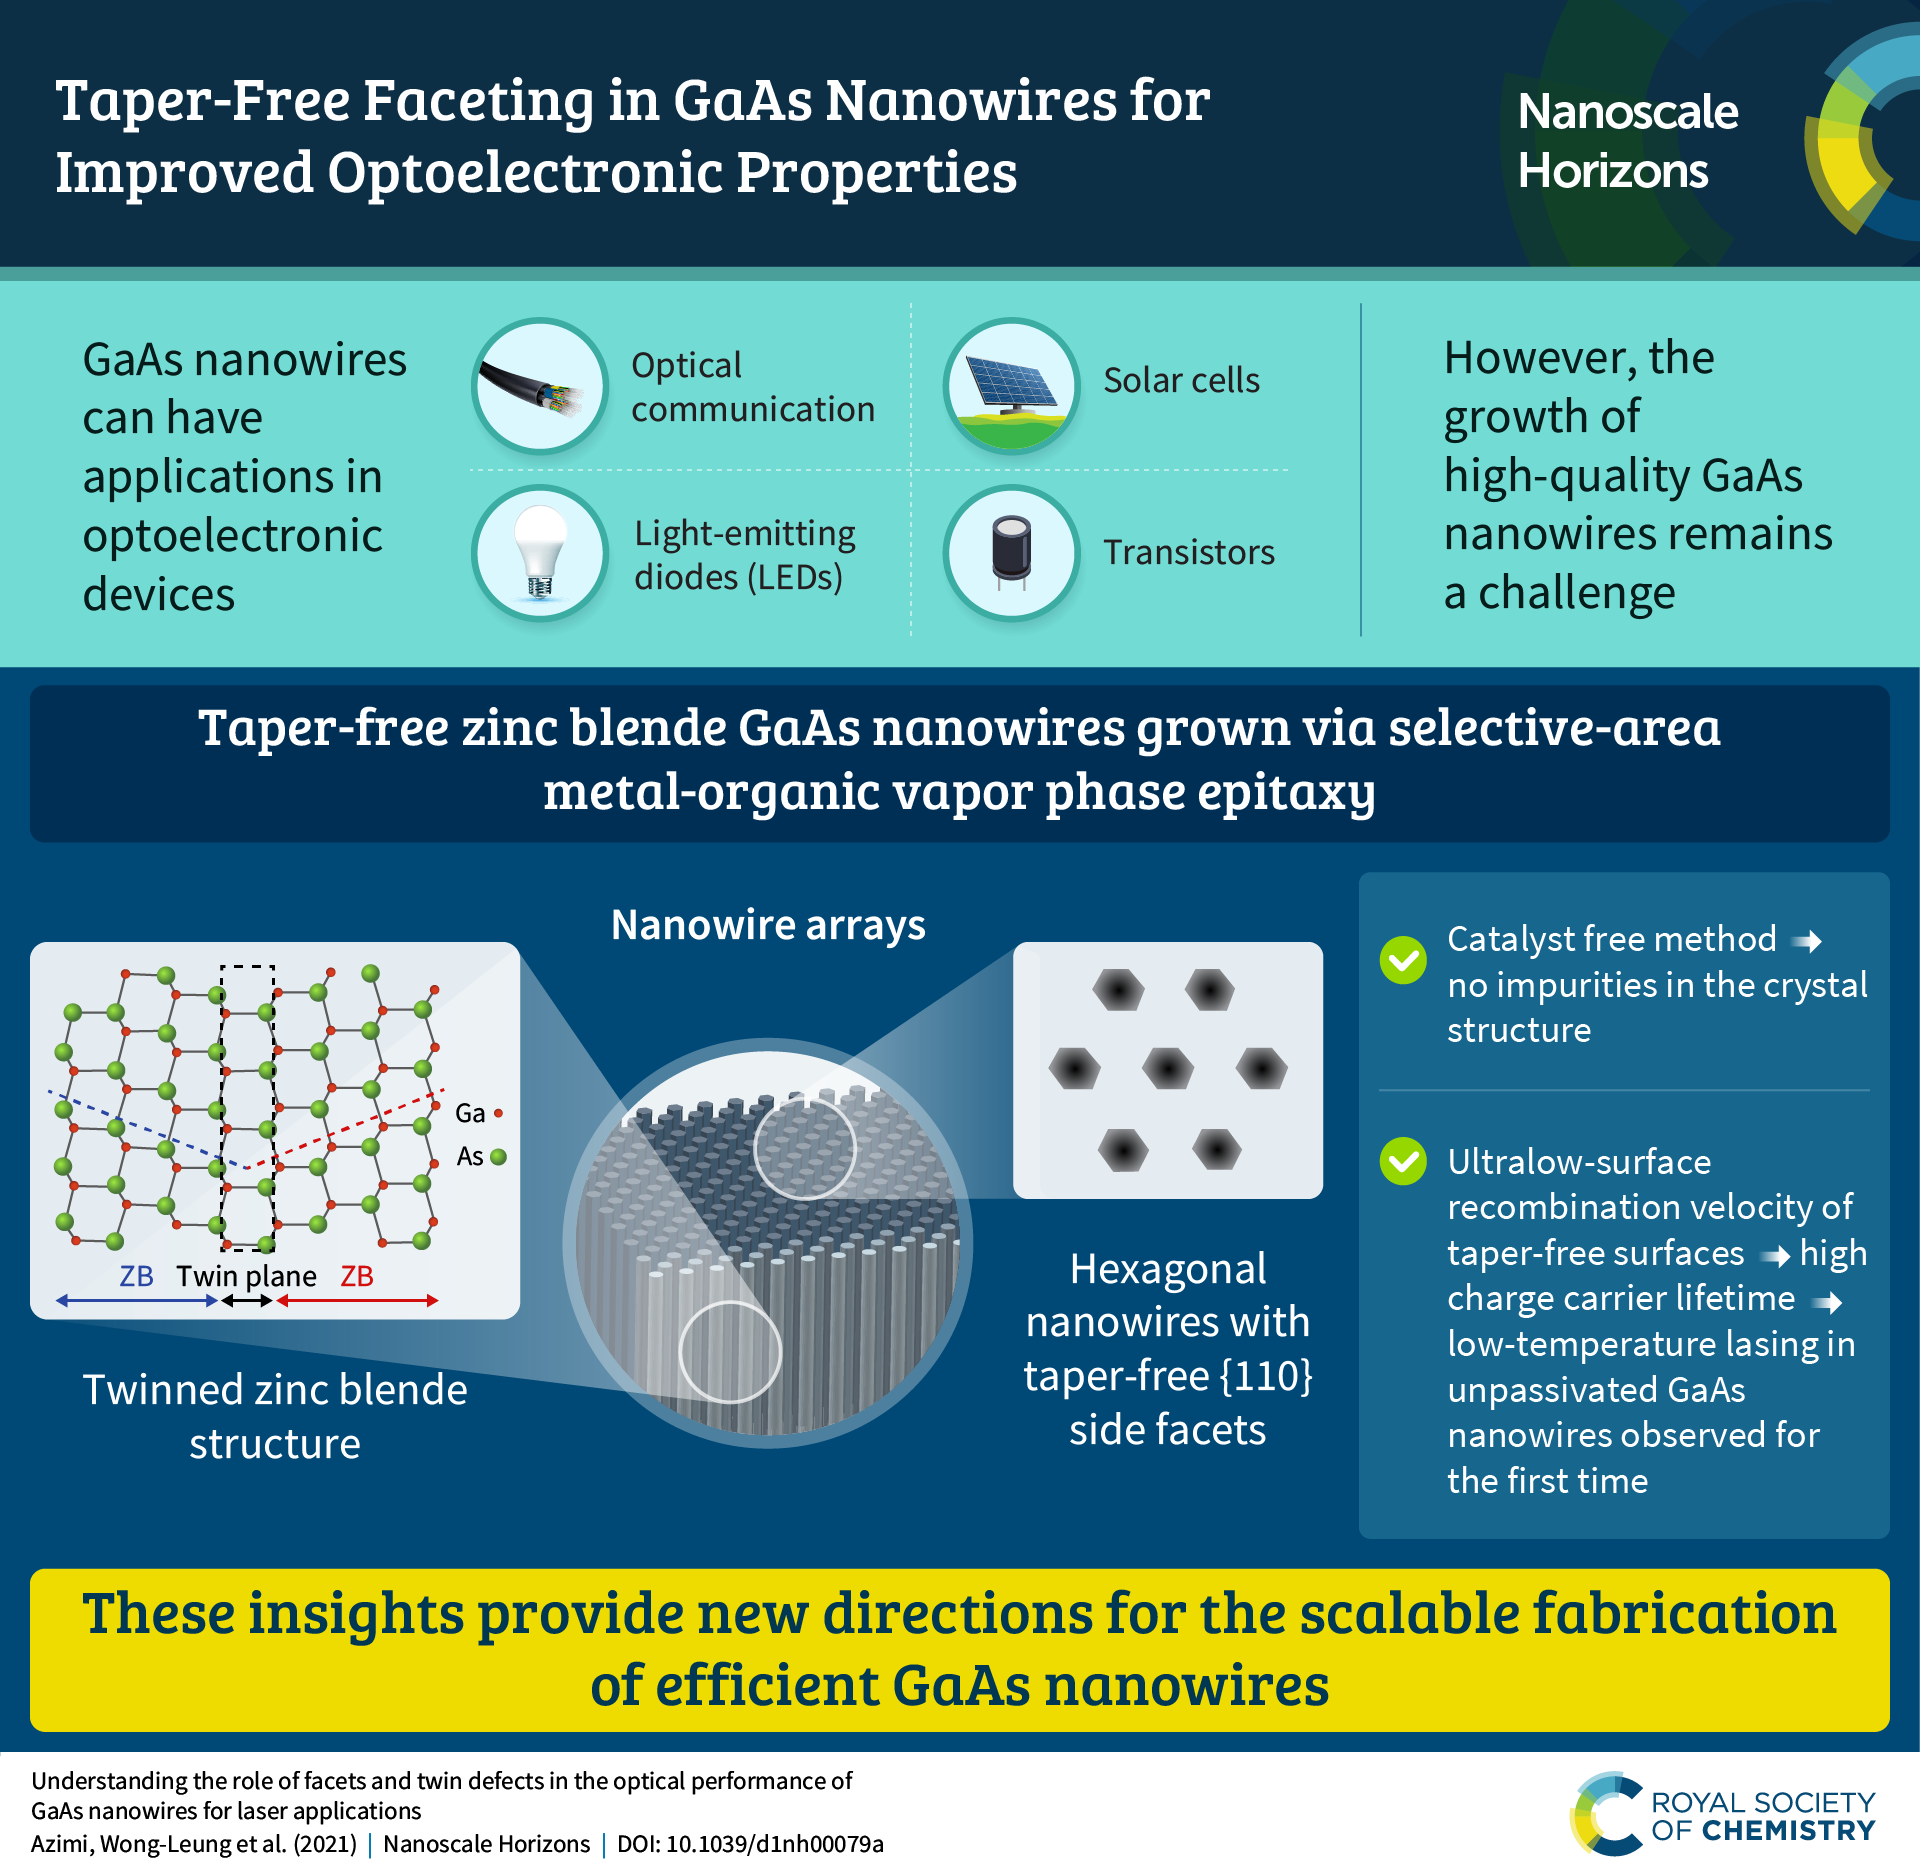 An infographic summarising the content of the article "Understanding the role of facets and twin defects in the optical performance of GaAs nanowires for laser applications"